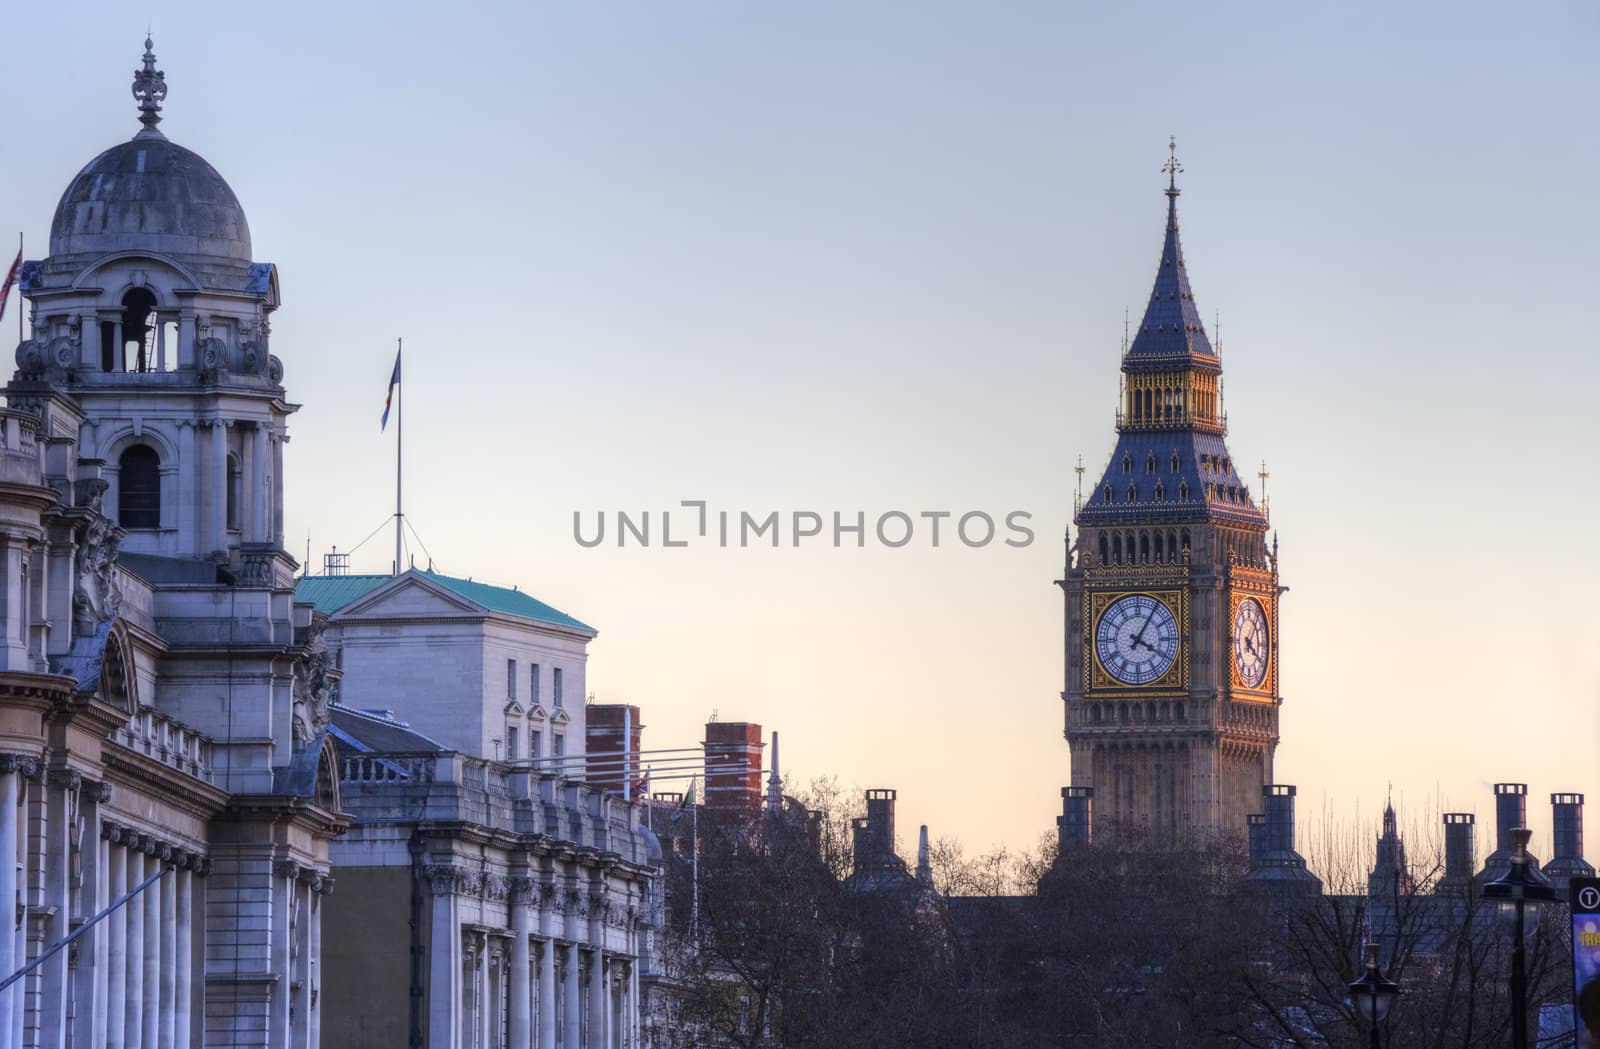 View of Big Ben in London looking down Whitehall from Trafalgar  by Veneratio